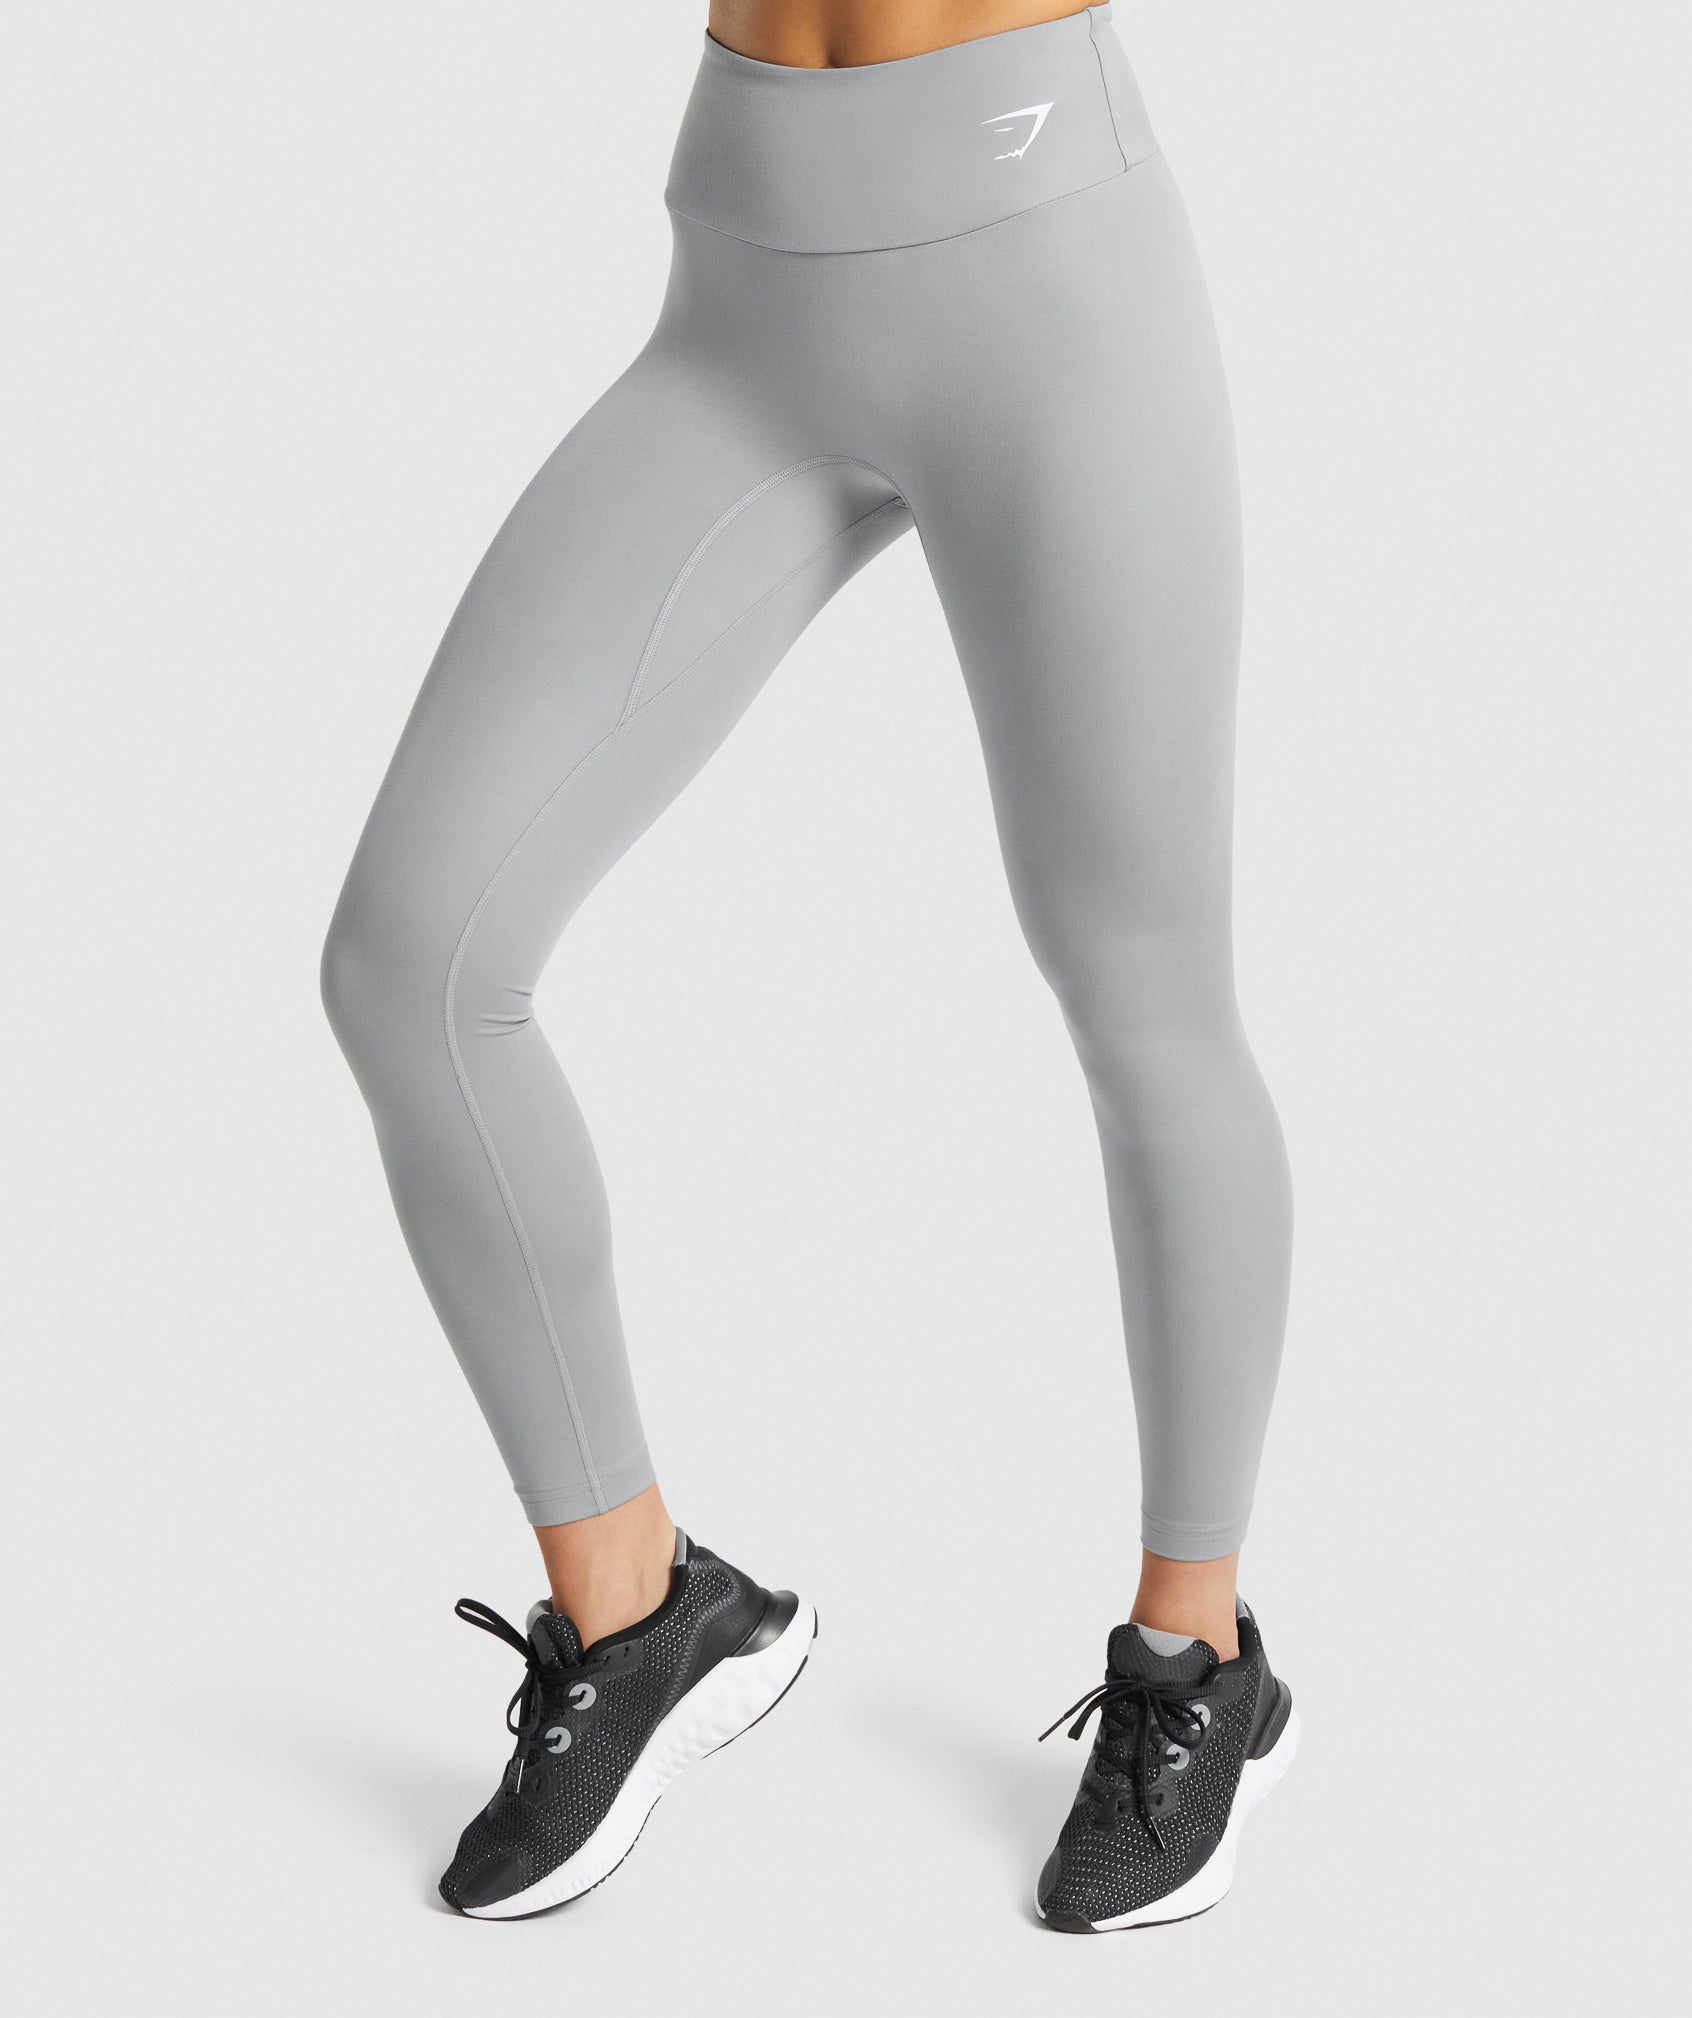 Black Gym Leggings - Free Delivery Available - Gymshark